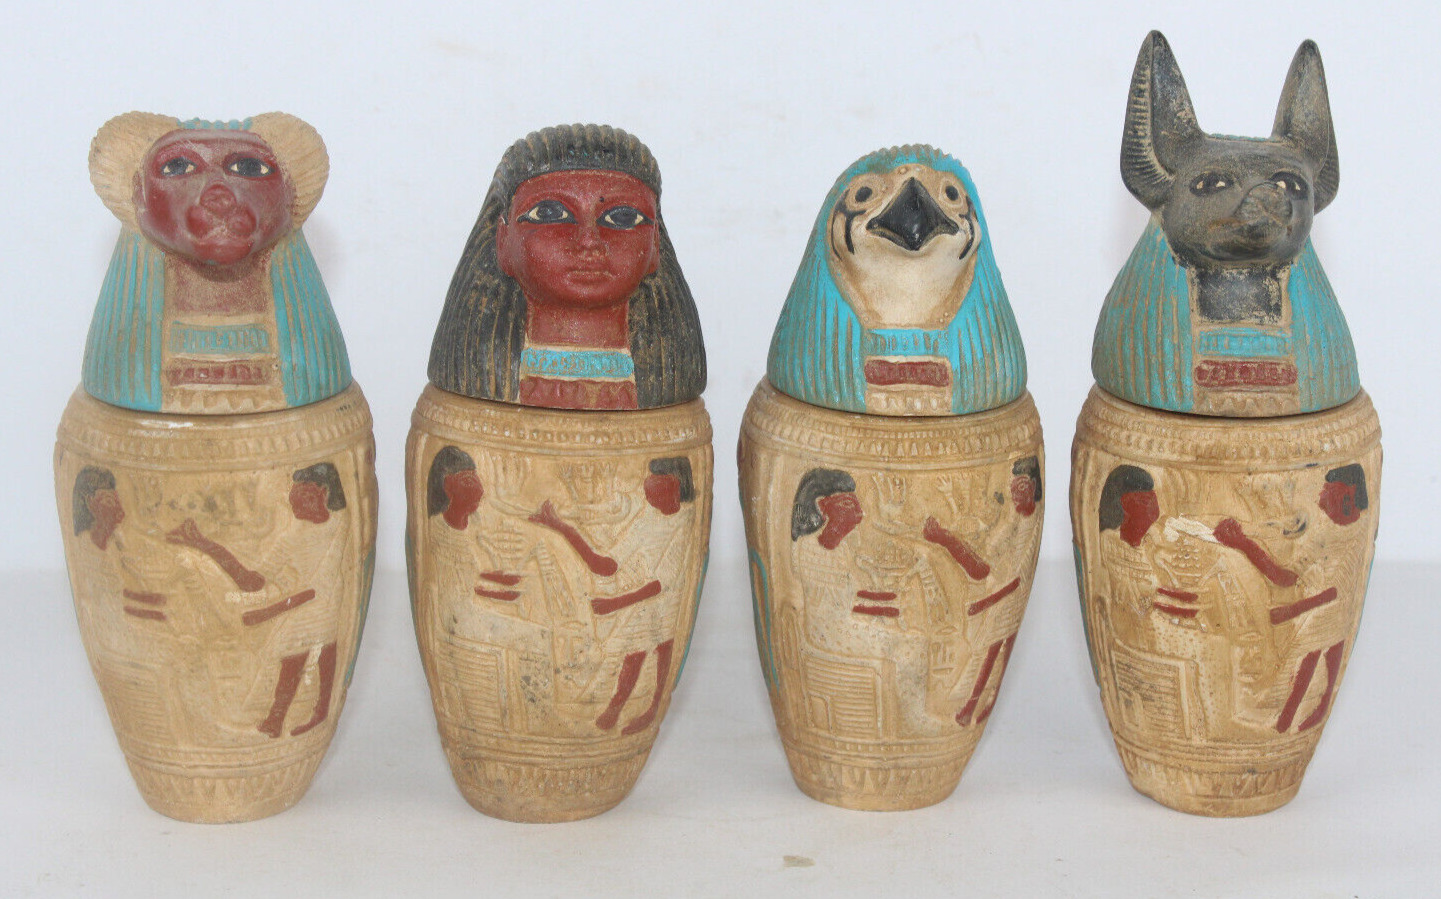 4 RARE ANCIENT EGYPTIAN ANTIQUE CANOPIC Jars Horus Sons Pharaonic Statues (B00+)